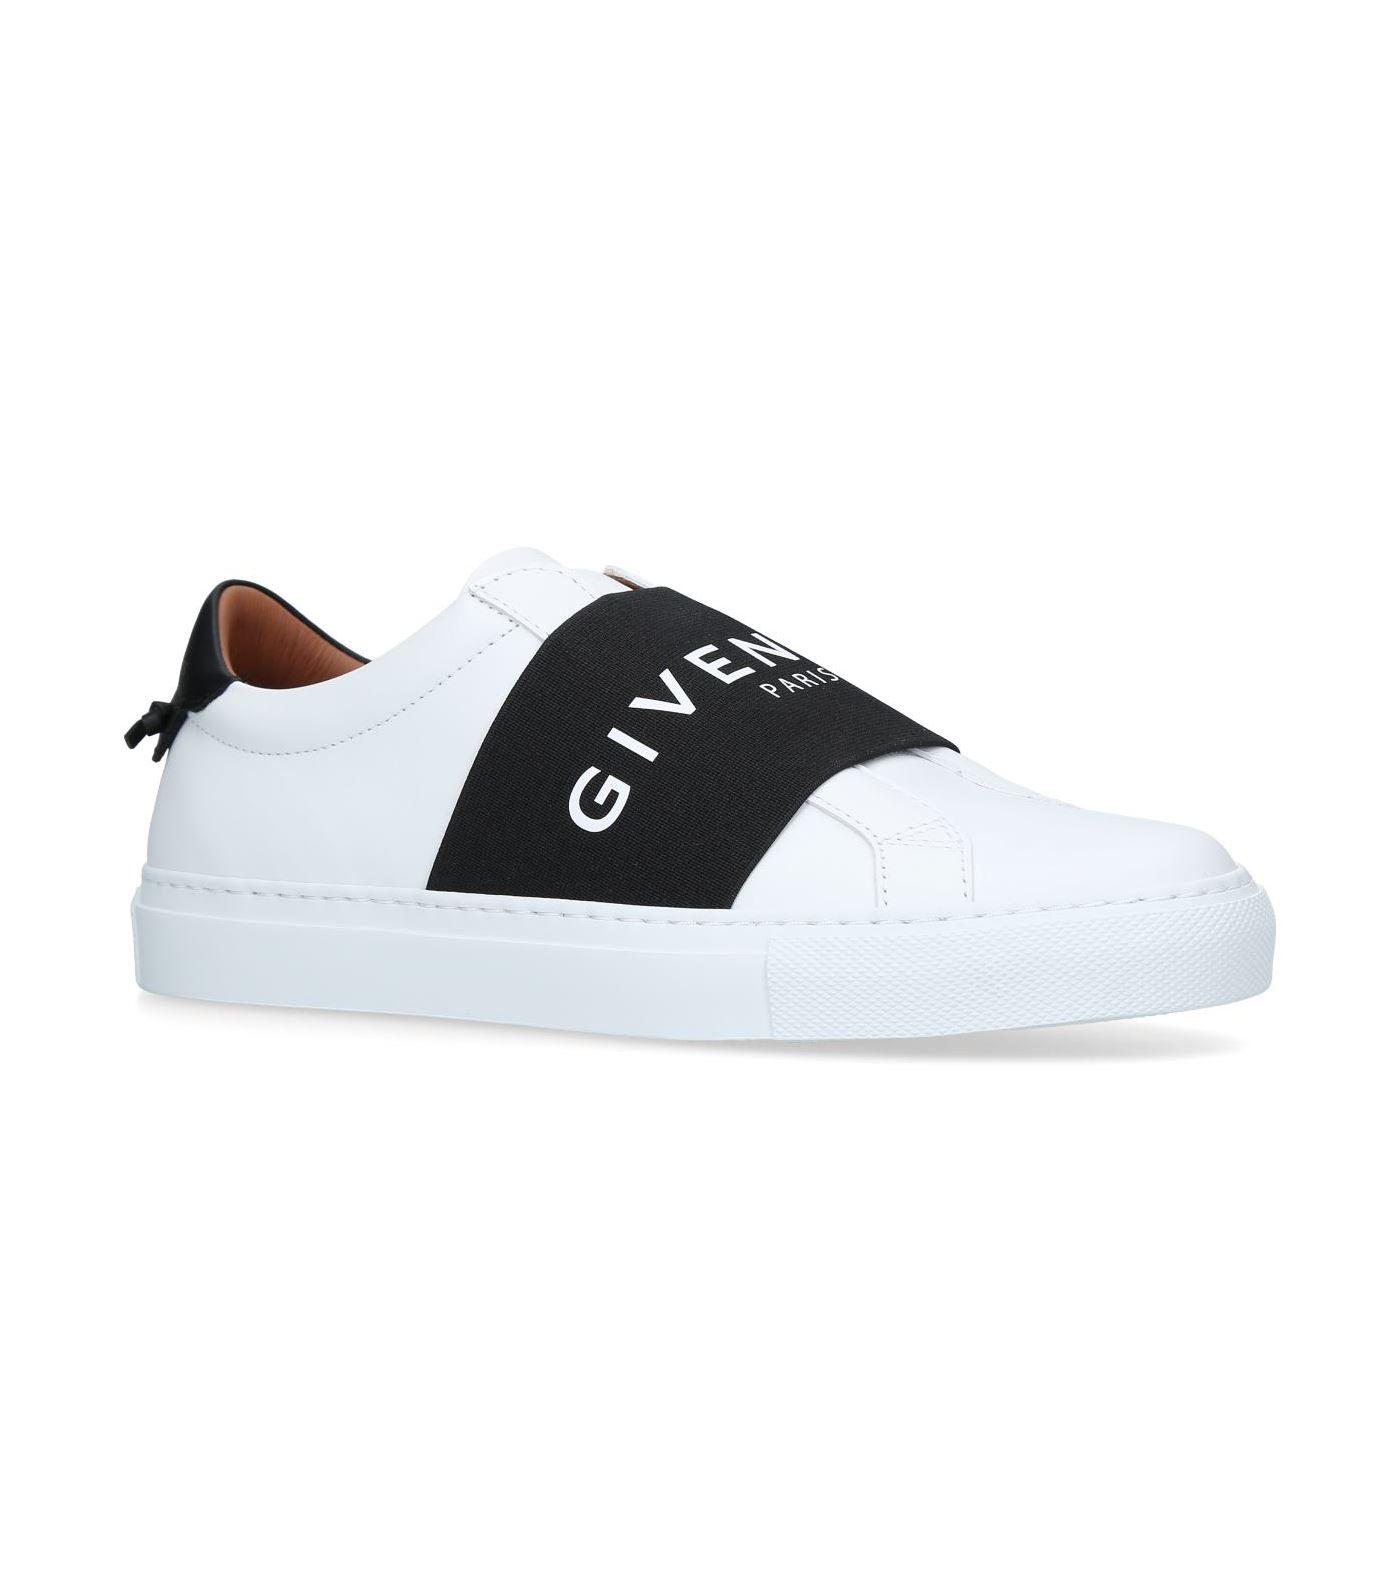 Givenchy Urban Street White Logo Sneakers in Black - Save 43% - Lyst